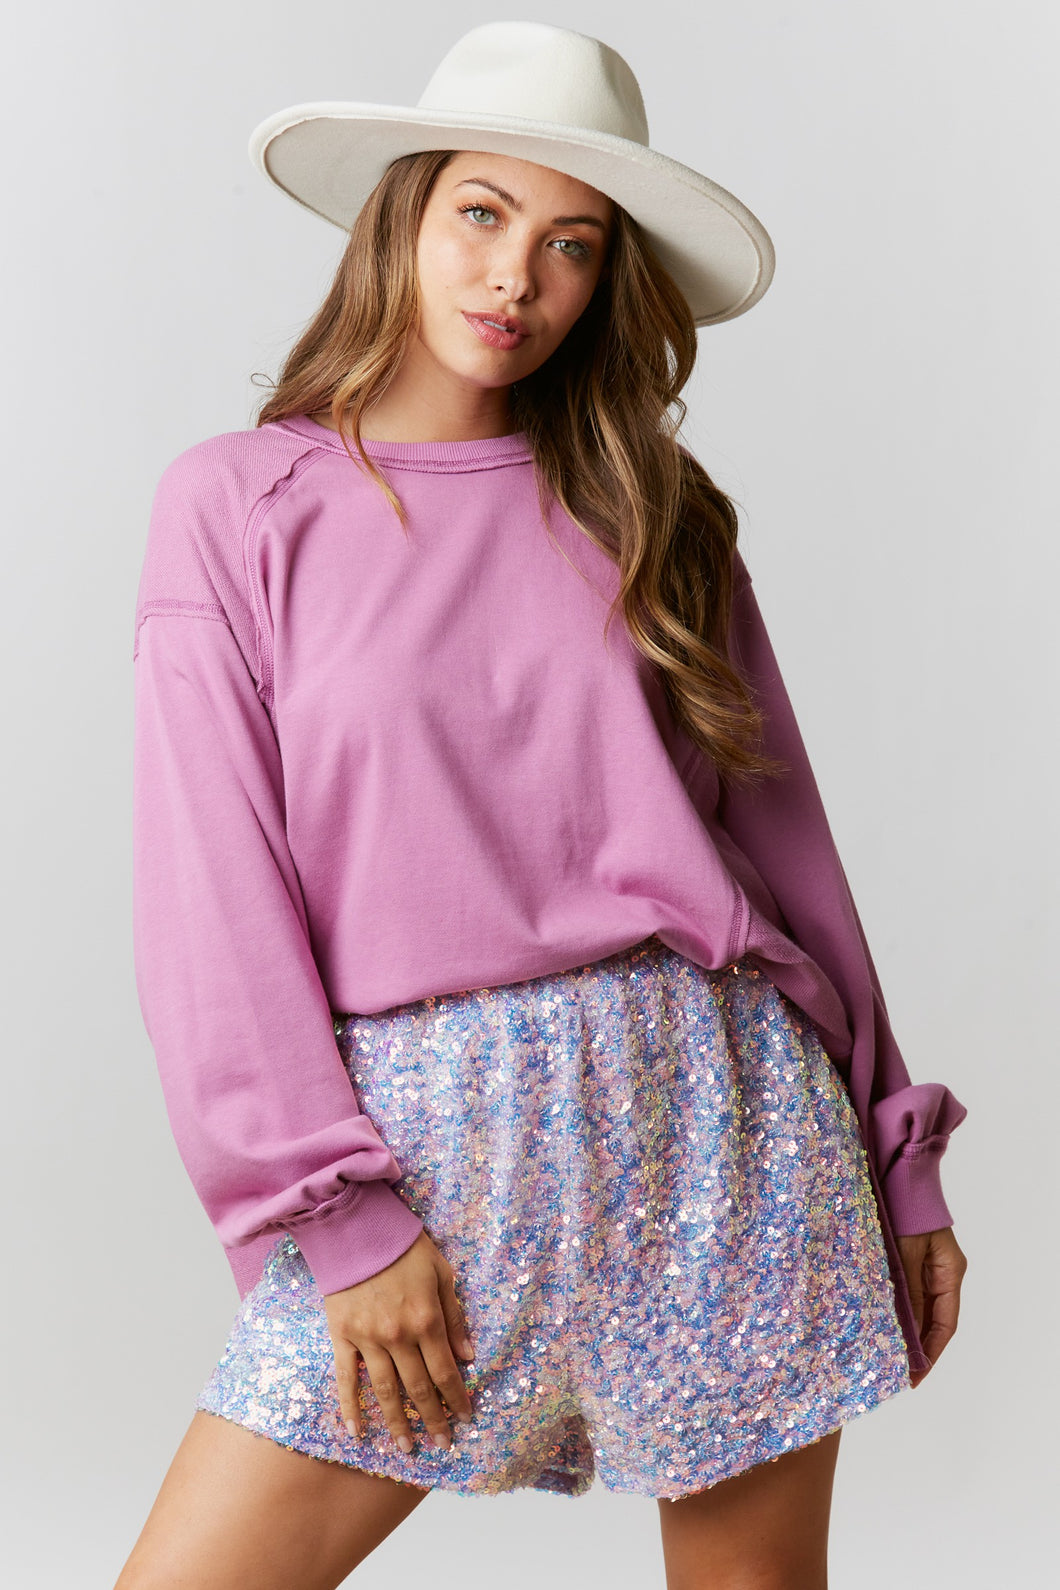 Fantastic Fawn Oversized Top With Reversed Stitch Details in Orchid Top Fantastic Fawn   